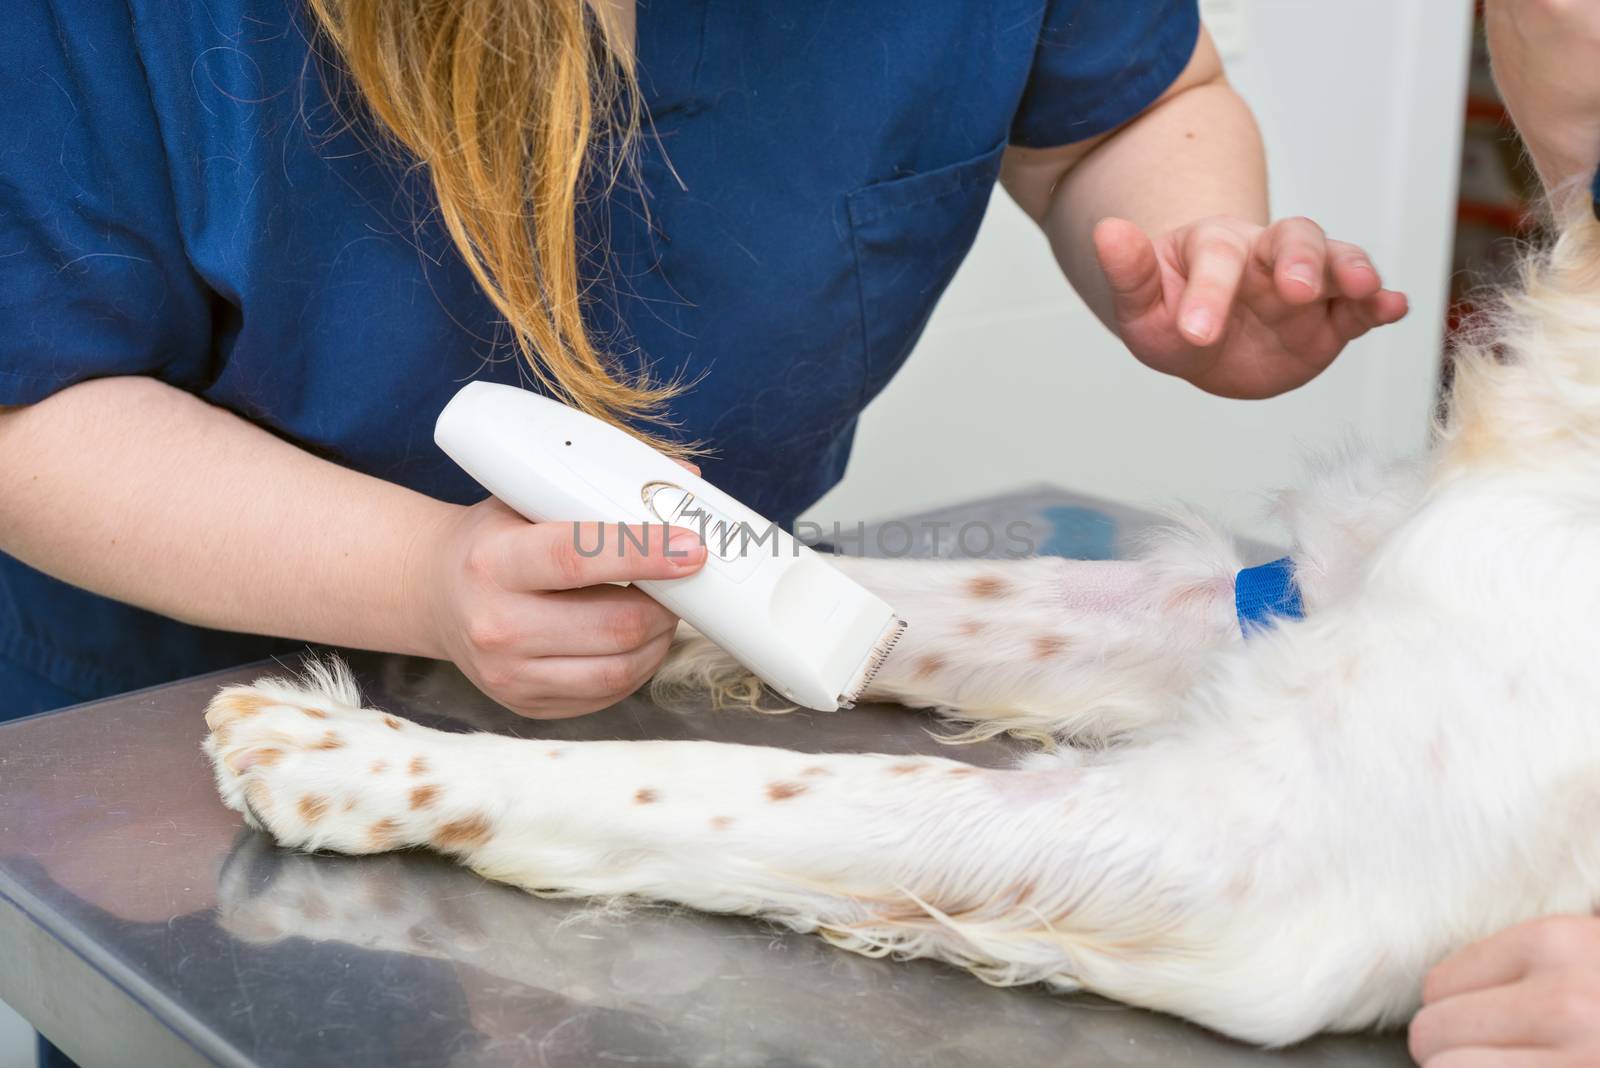 veterinarian shaving a dog for surgery. close up by HERRAEZ